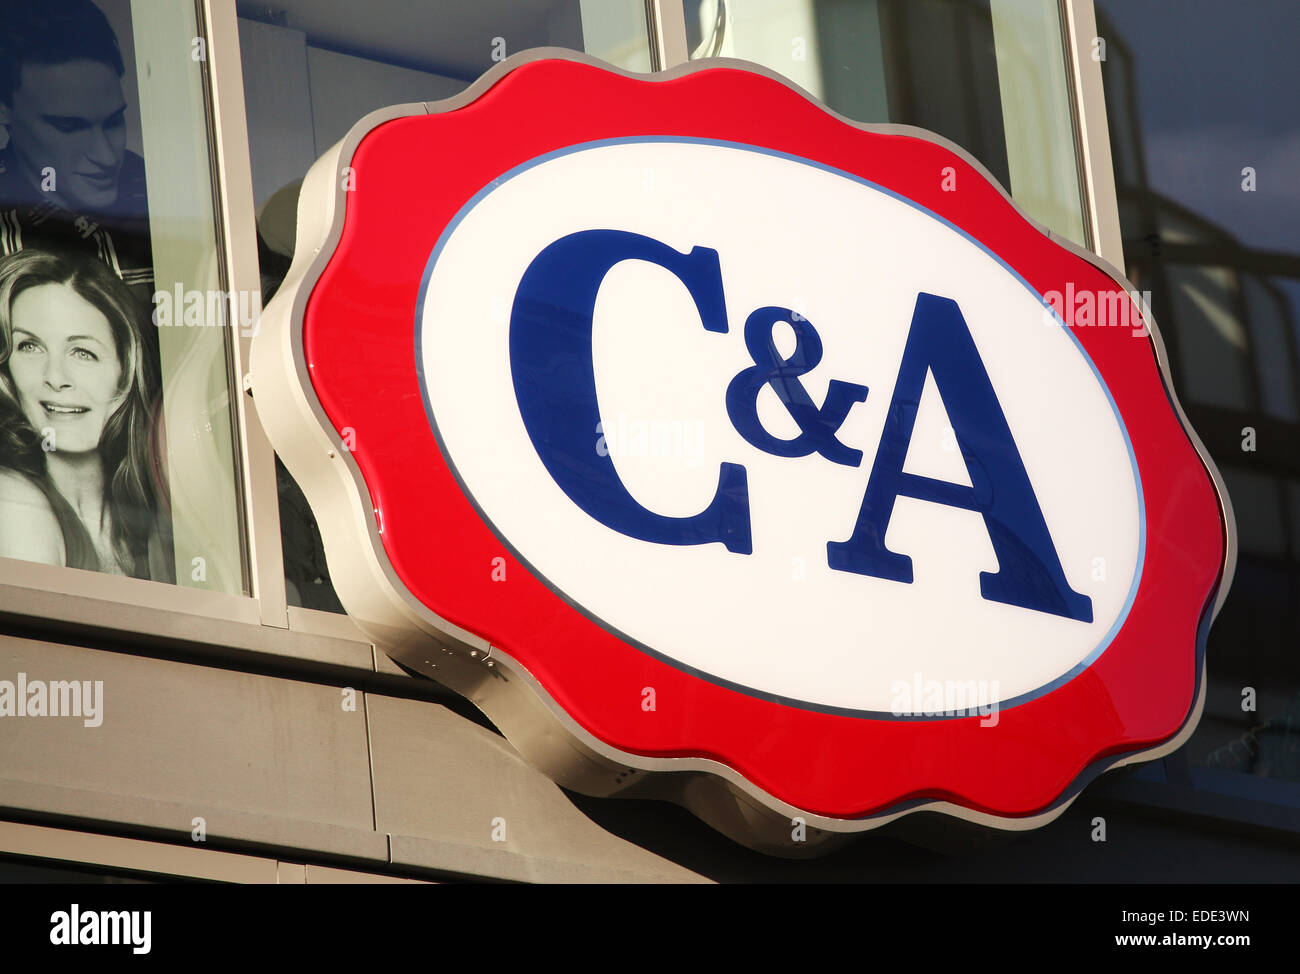 The C&A logo on a sign at a departement store in Berlin, Germany ...